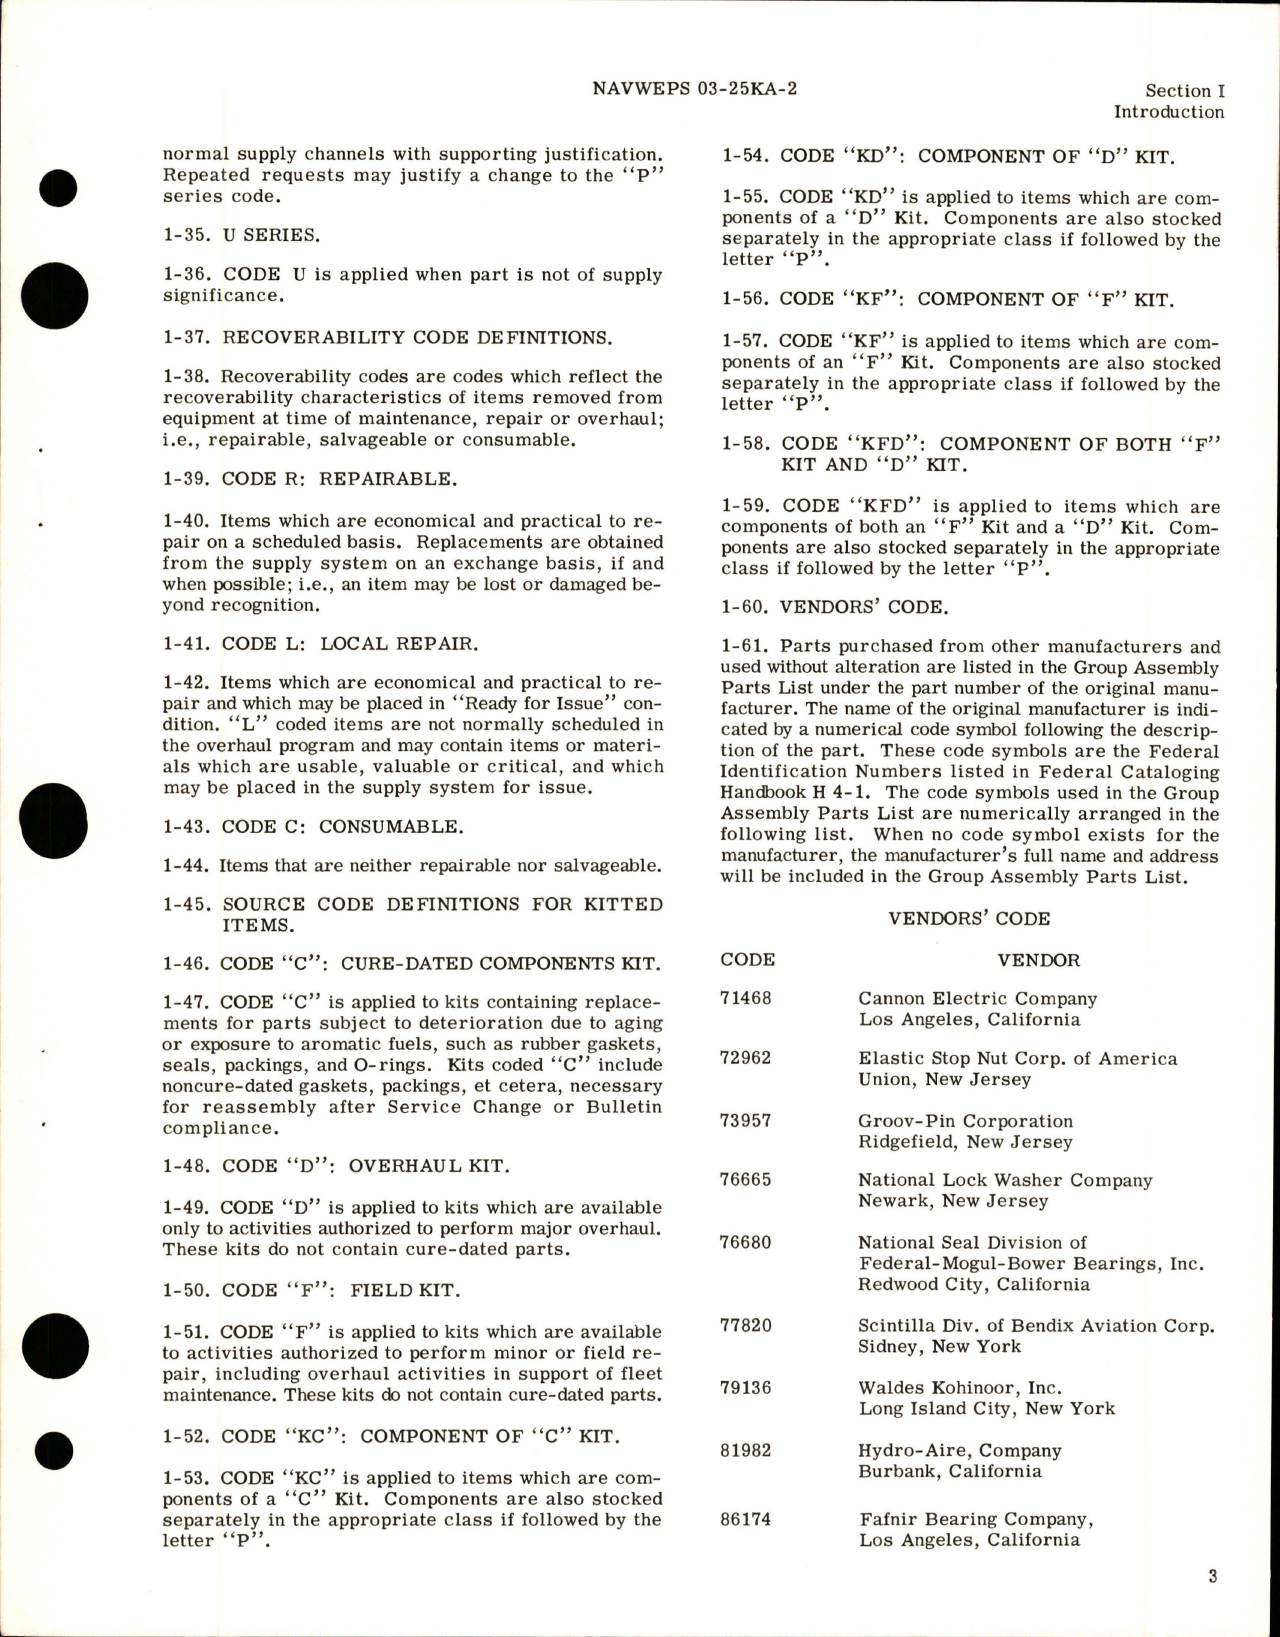 Sample page 5 from AirCorps Library document: Illustrated Parts Breakdown for Hytrol Skid and Locked Wheel Detector Assembly - Parts 4811B-1 and 4811B-2